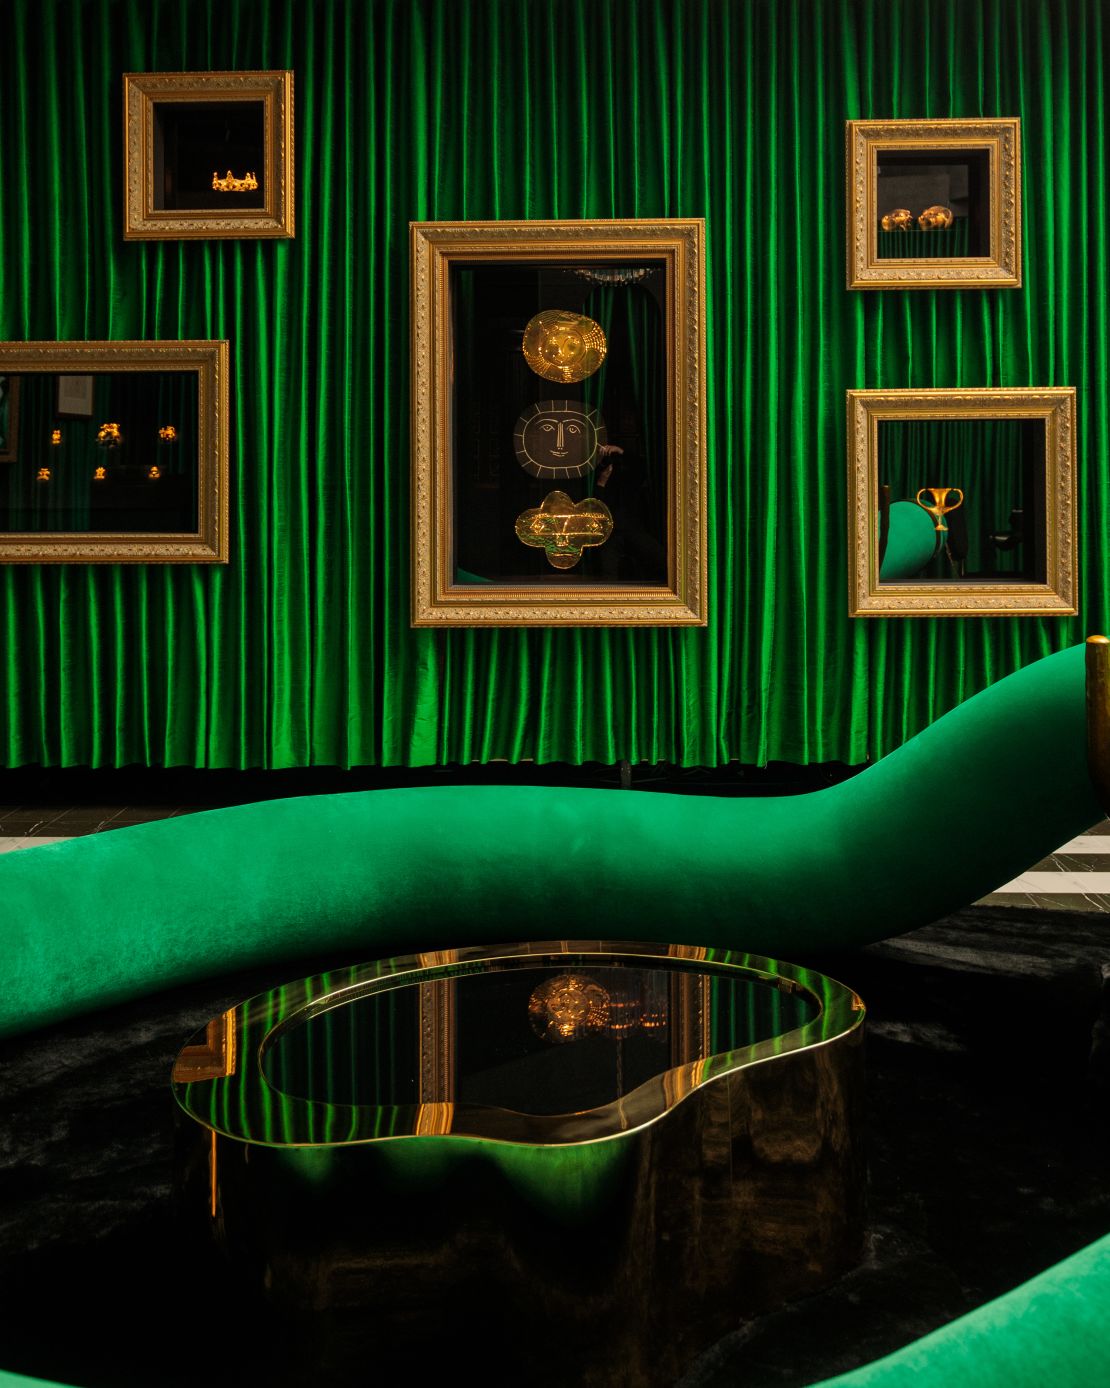 The Ladies Lounge, enclosed in green silk curtains contains “precious antiquities and priceless modernist works” including “two paintings that spectacularly demonstrate Picasso’s genius,” according to Kaechele.